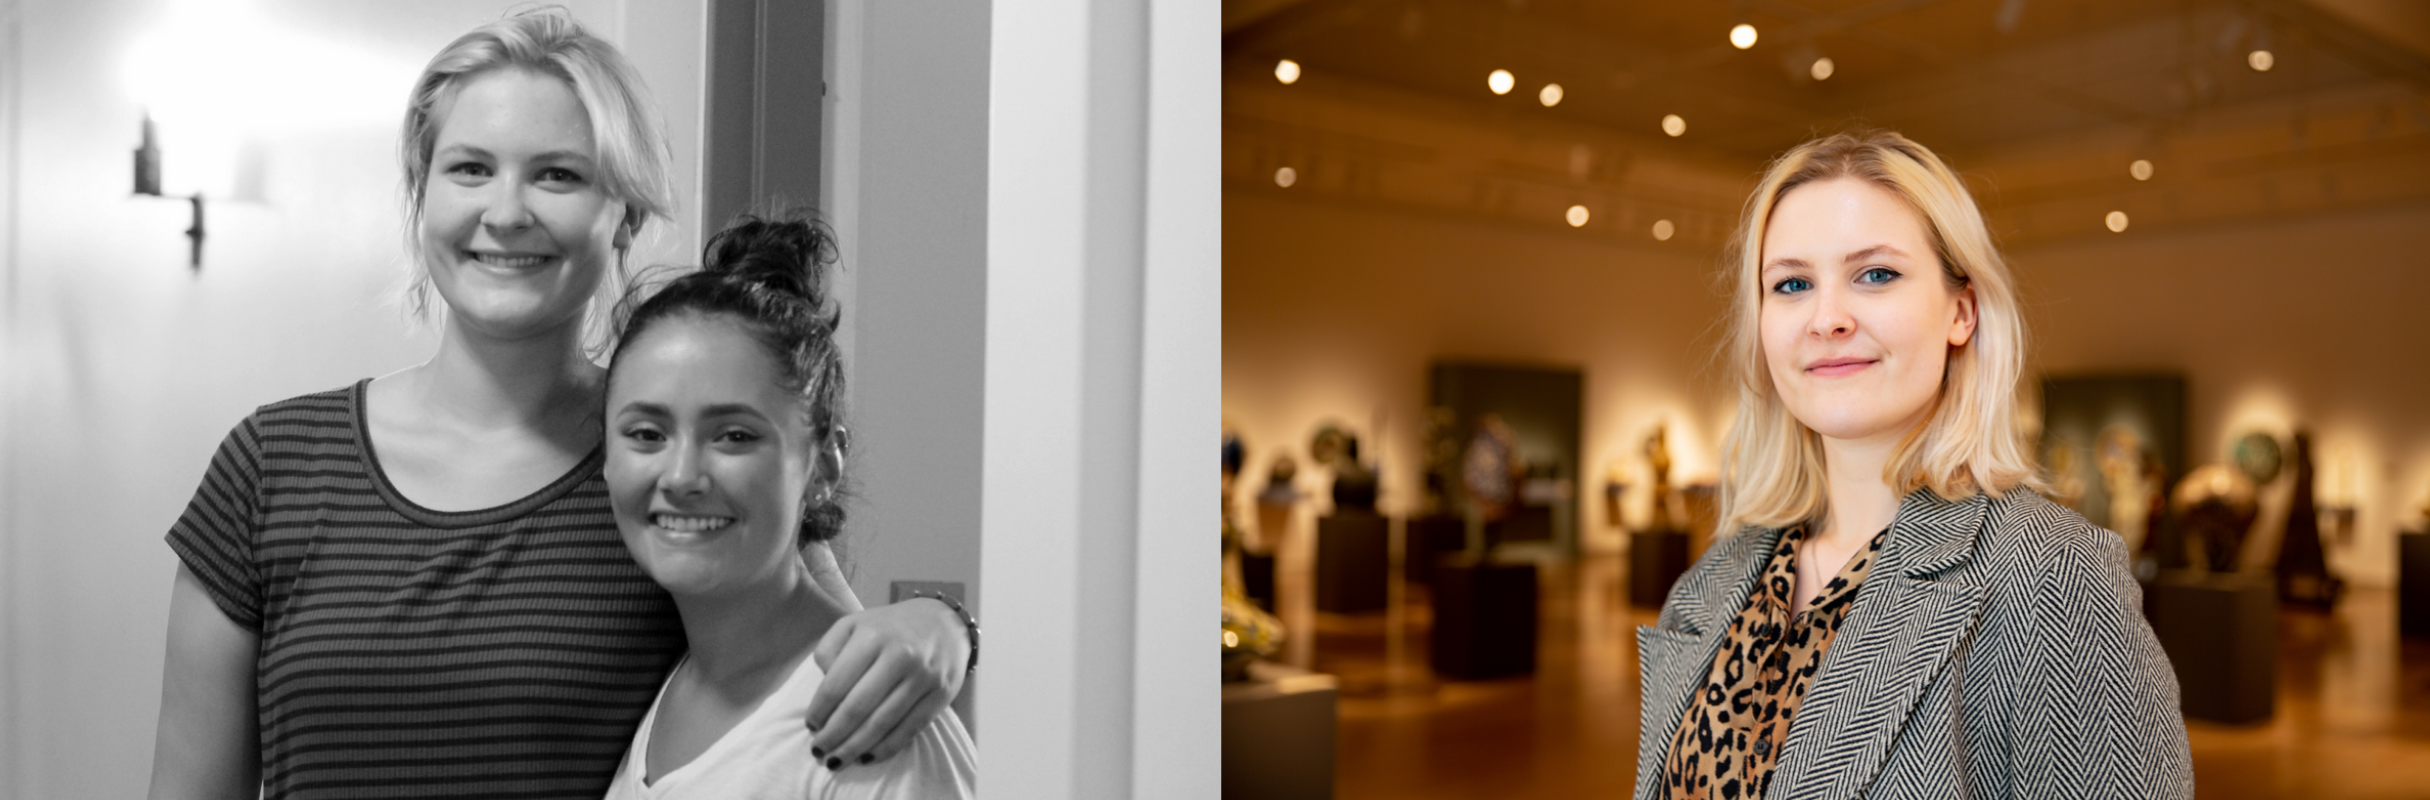 A black and white photo of two young woman smiling next to each other in a hallway next to a colored picture of the young blond woman wearing professional clothing and smiling in an art gallery.